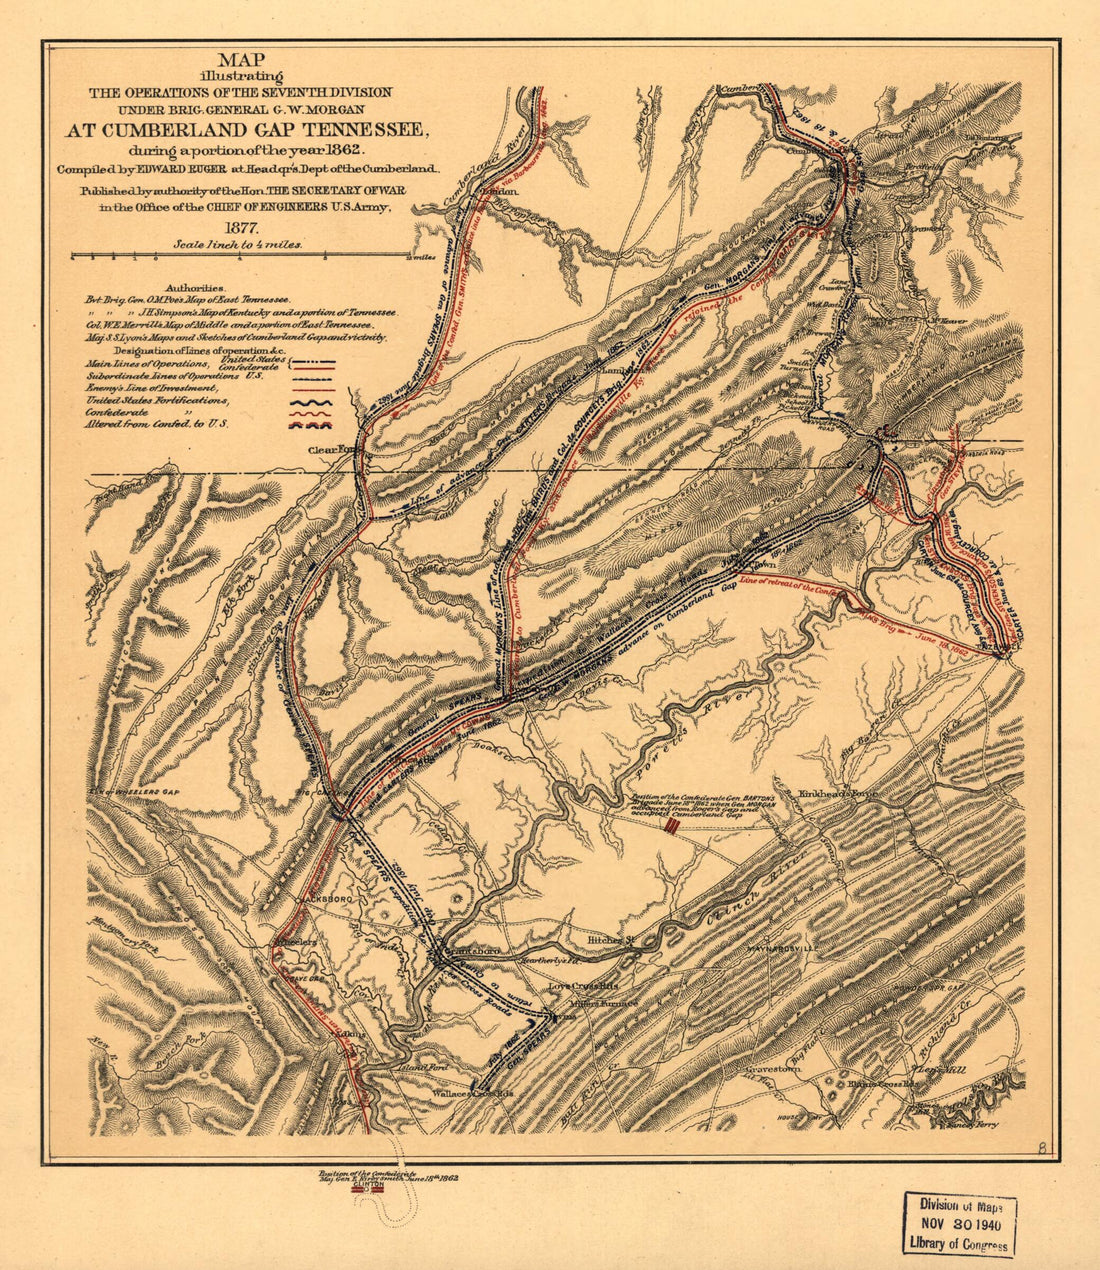 This old map of Map Illustrating the Operations of the Seventh Division Under Brig. General G. W. Morgan at Cumberland Gap, Tennessee, During a Portion of the Year 1862 from 1877 was created by Edward Ruger in 1877